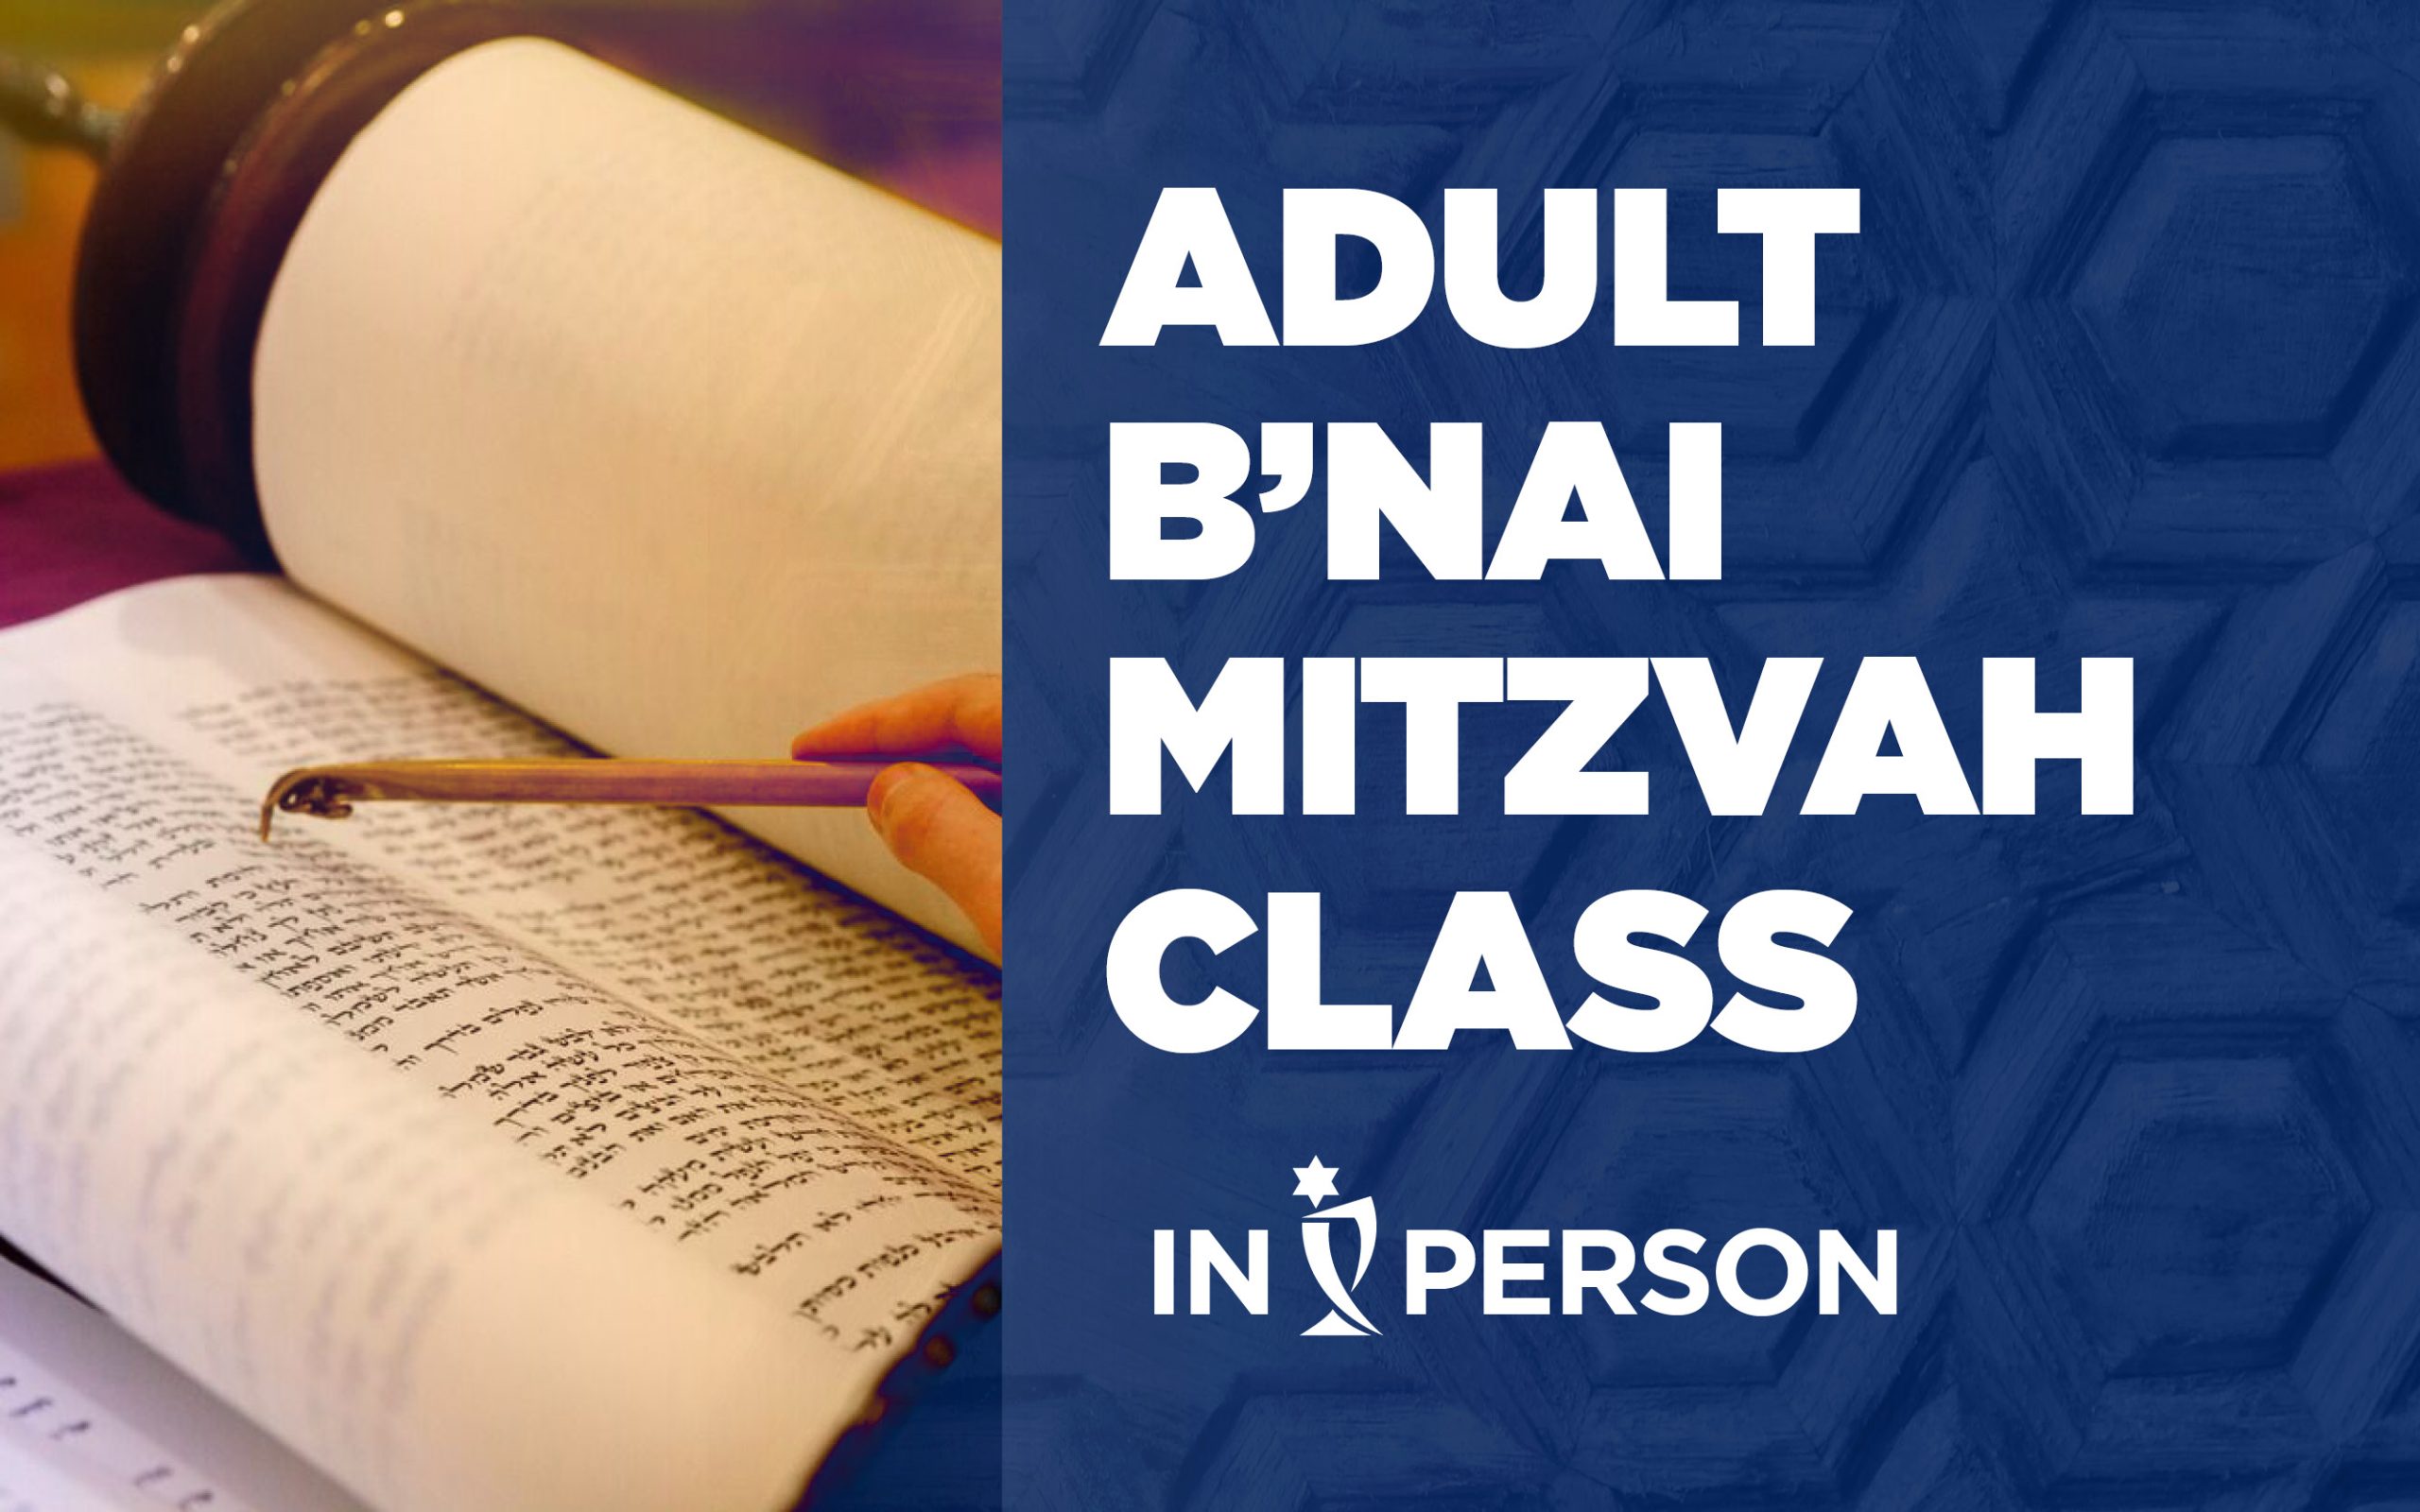 Adult B'nai Mitzvah Class Event Graphic for Temple Beth El - In Person